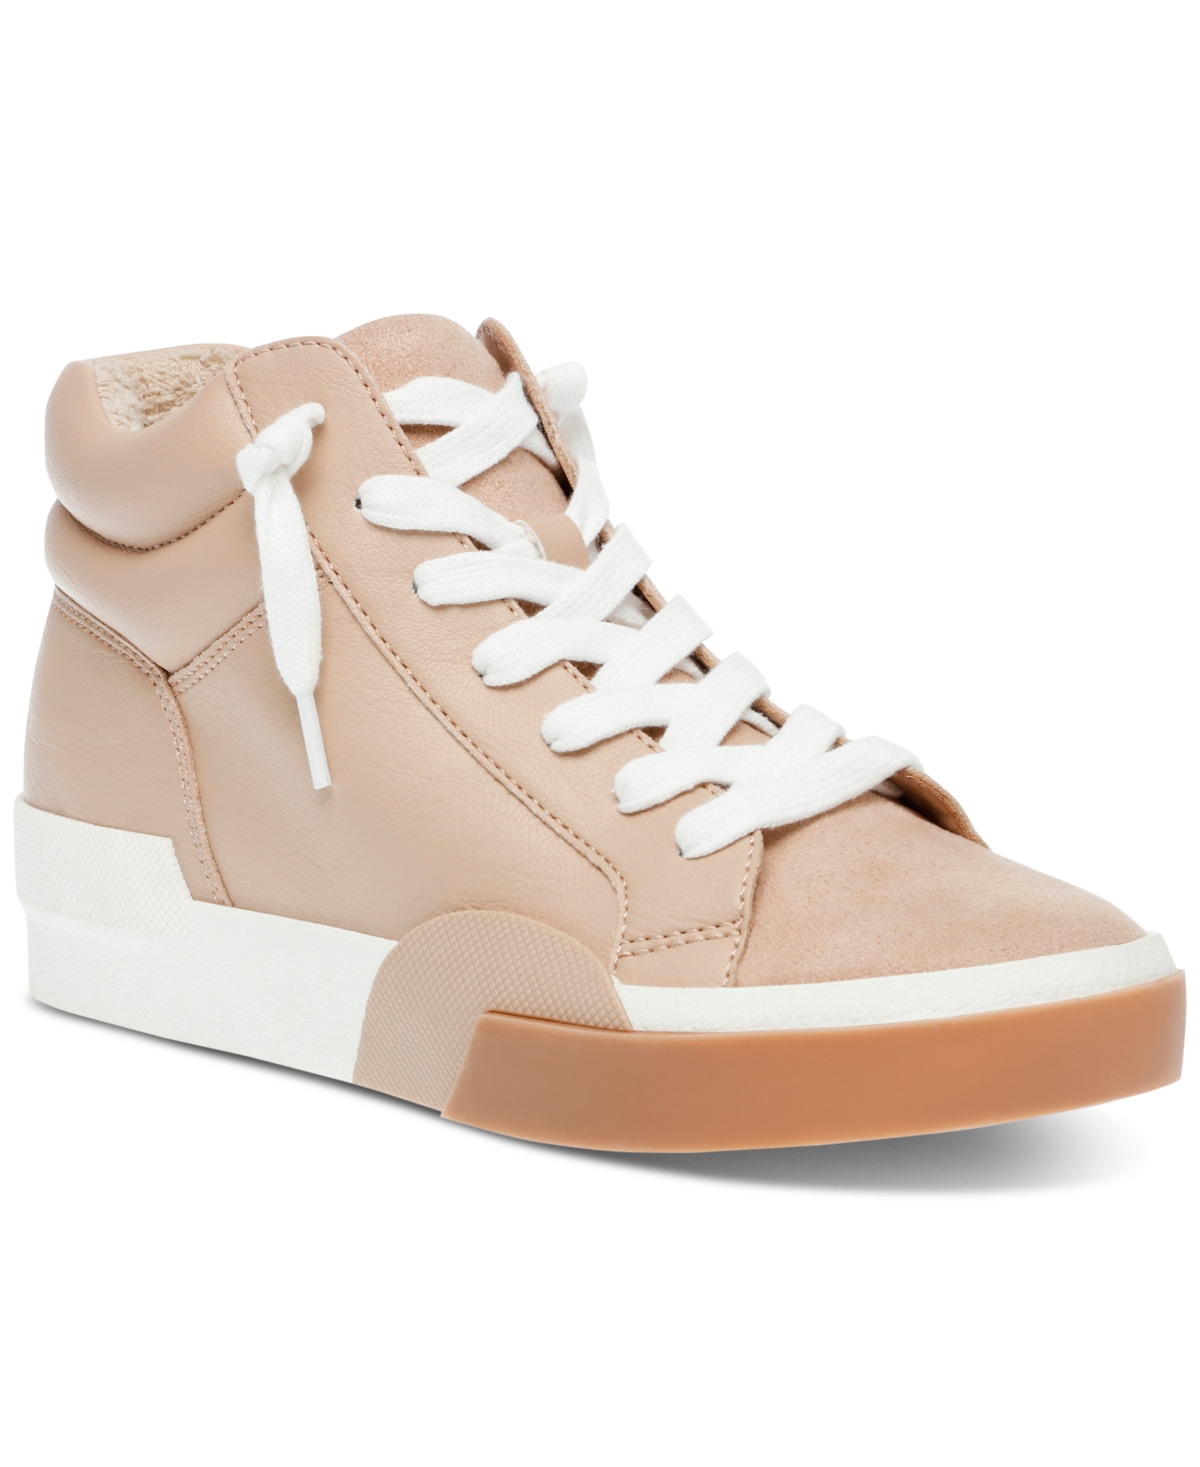 Dv Dolce Vita Women's Holand Lace-up High Top Sneakers In Sand